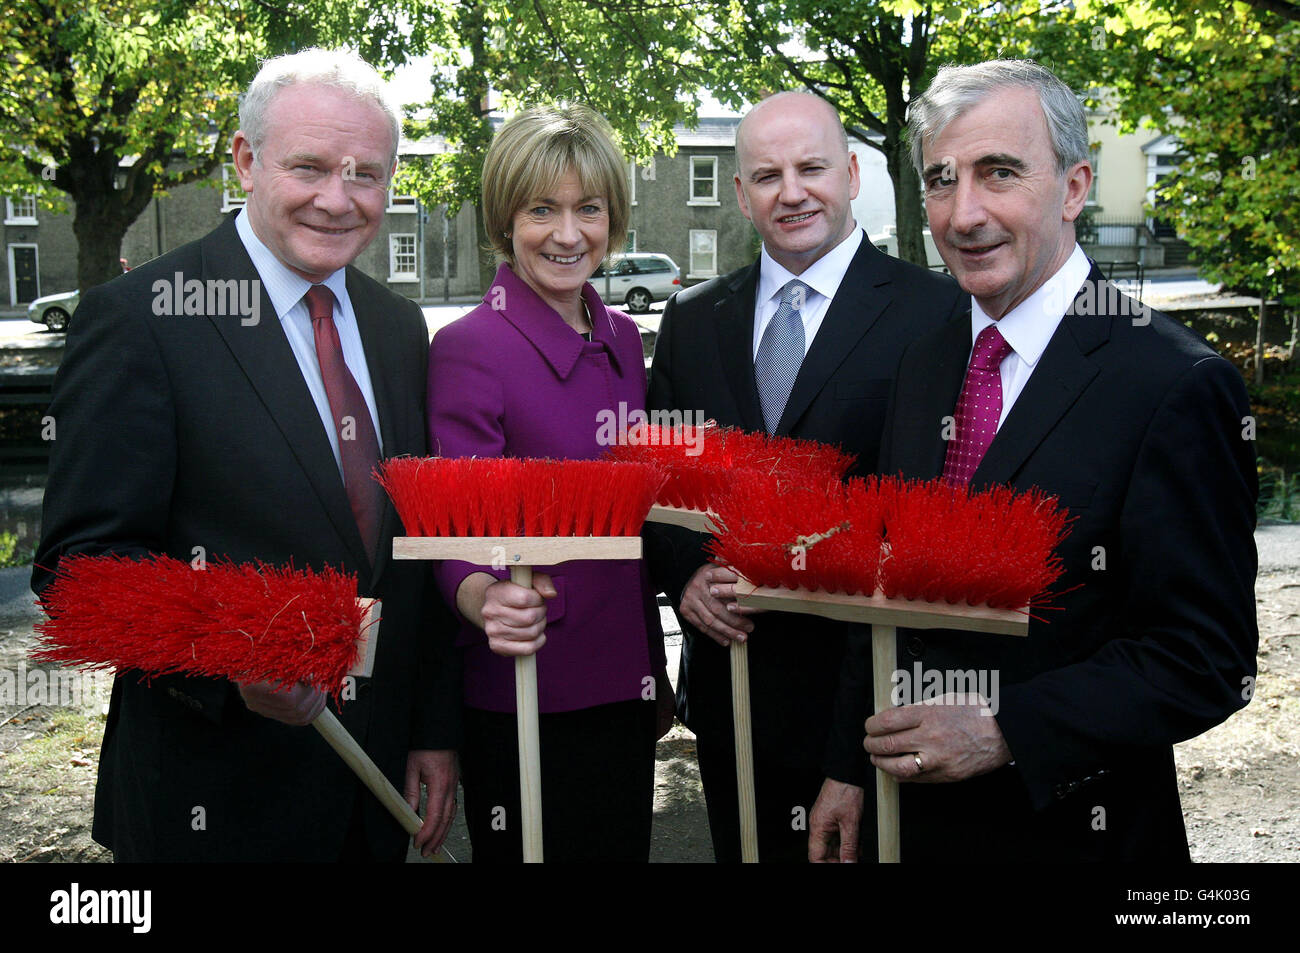 Presidential candidates (from left to right) Martin McGuinness, Mary Davis, Sean Gallagher and Gay Mitchell take part in a photo call to mark National Volunteer Day as members of Volunteer Ireland clean up Dublin's Grand Canal. Stock Photo